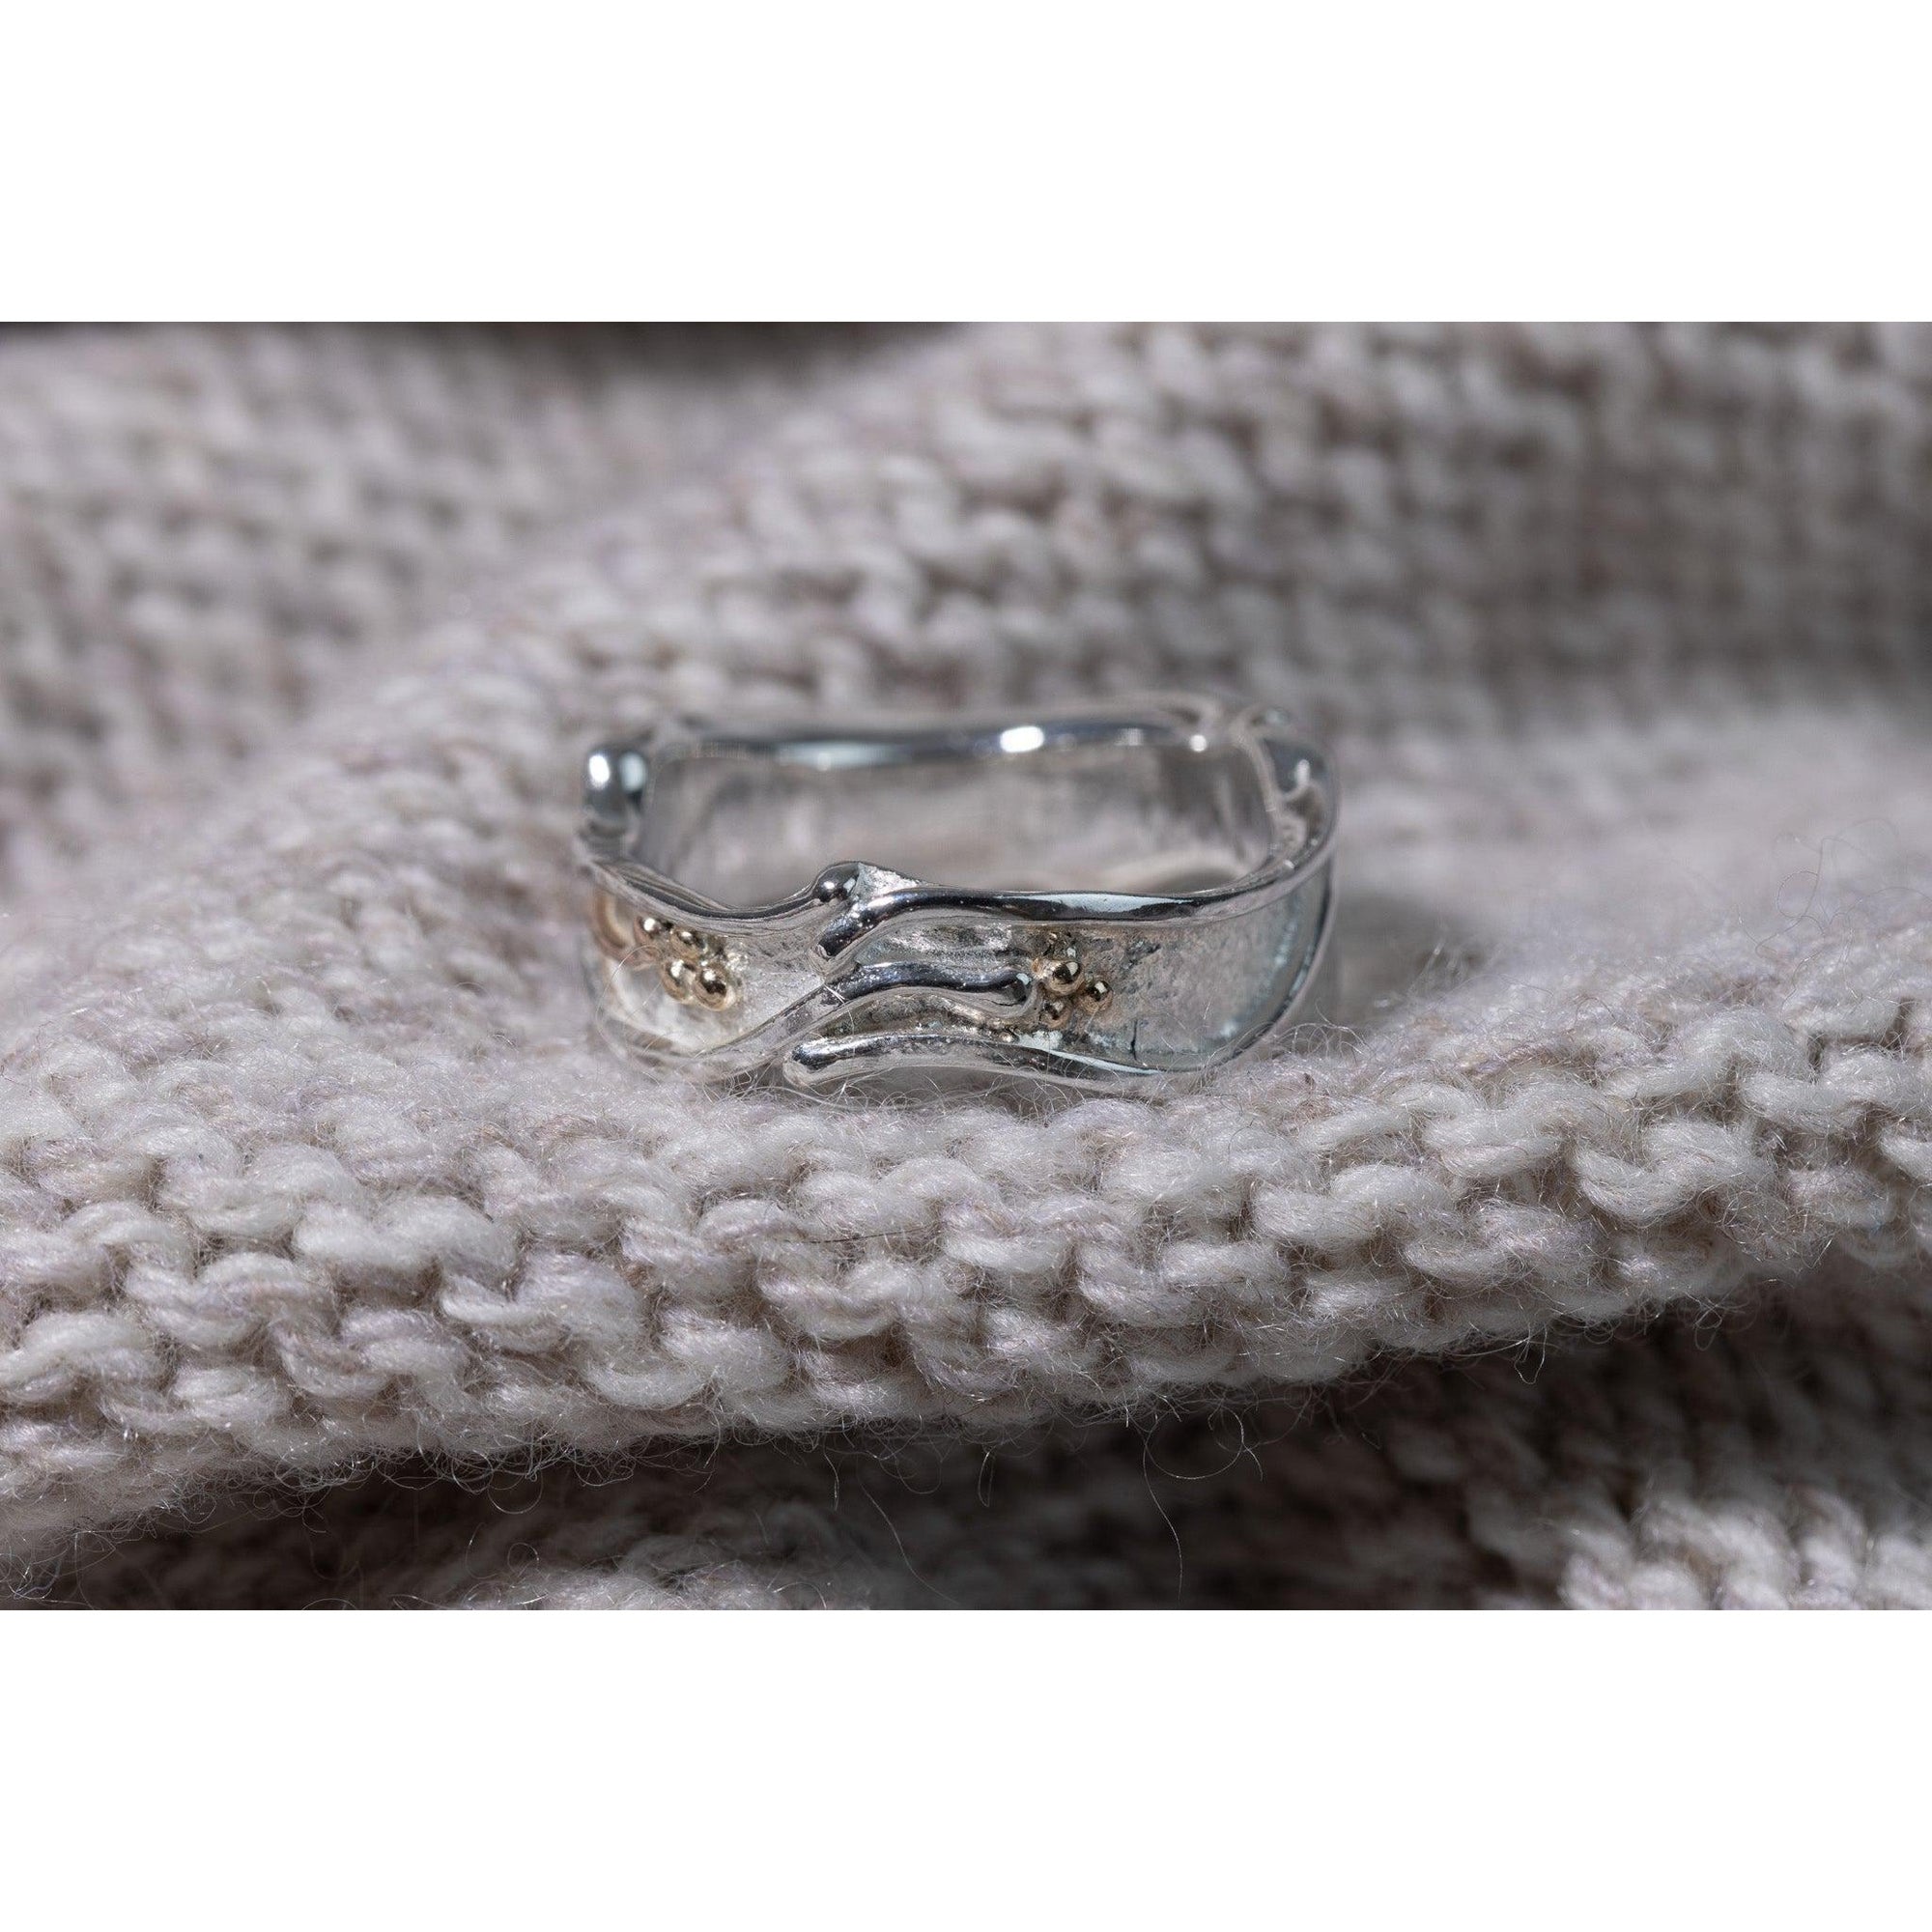 'LG56 - Silver Ring with 9ct Gold' by Les Grimshaw, available at Padstow Gallery, Cornwall